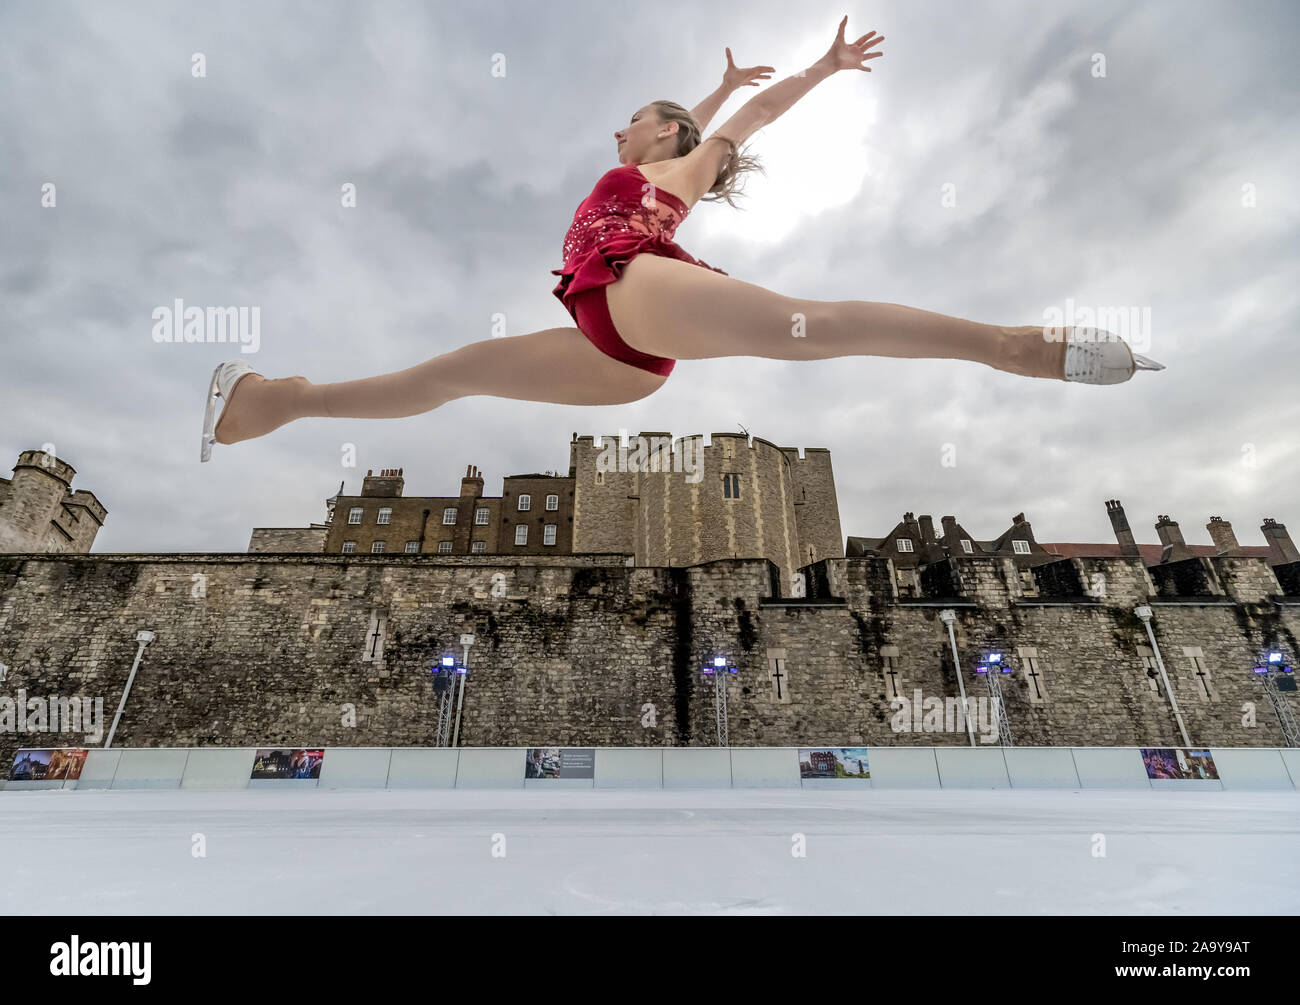 Kayla Fry, 16, International gold and silver medallist Team GB junior figure skater, performs at Tower of London ice rink. London, UK. Stock Photo